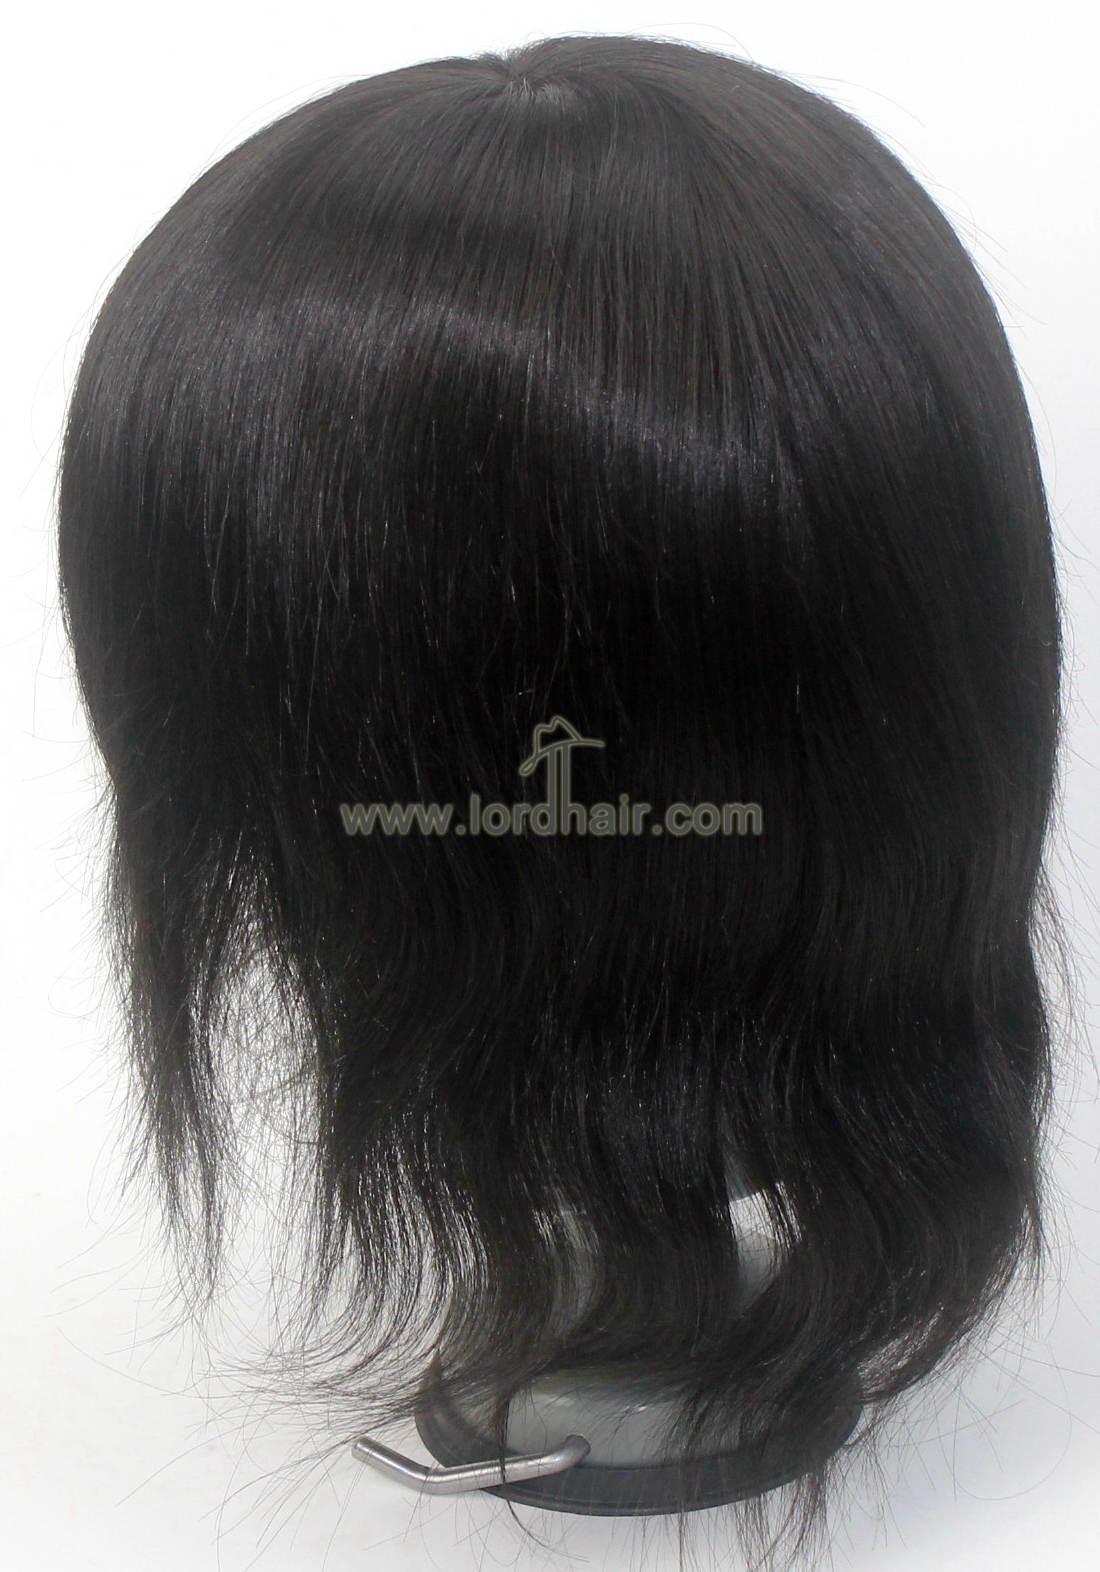 YJ714: Silk Top with Thin Skin Perimeter and Lace Front Hair Replacement